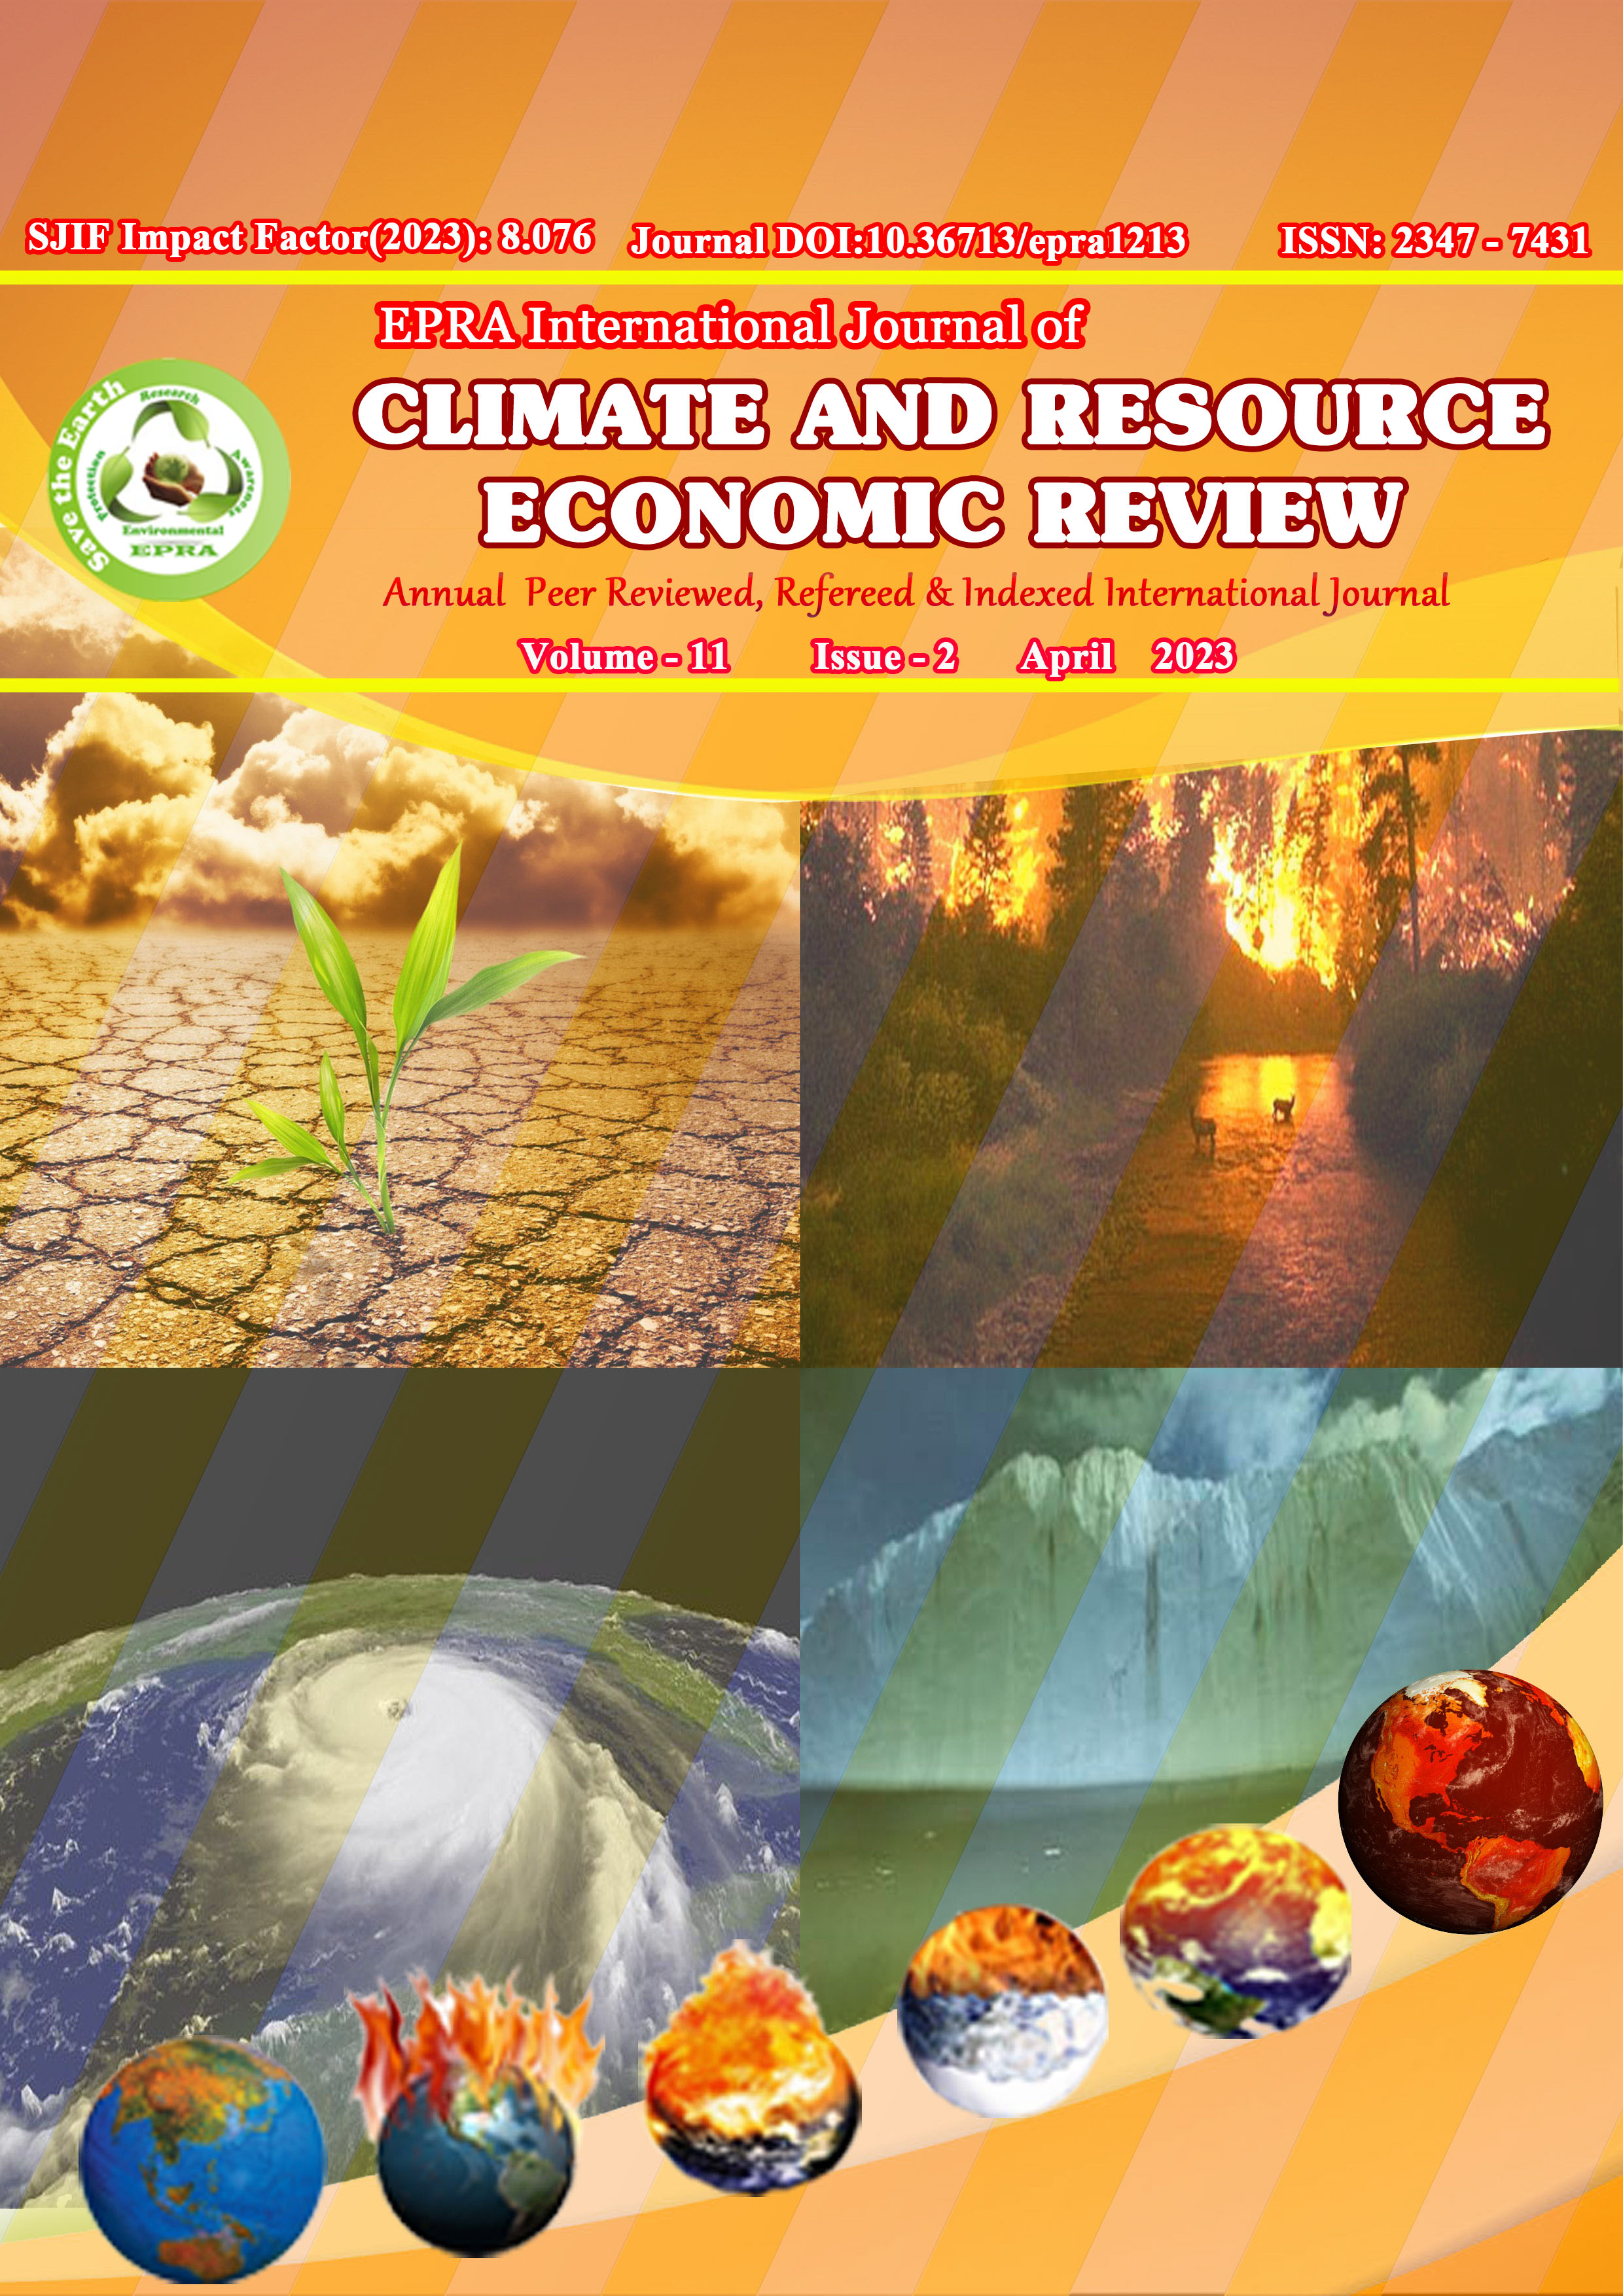 					View Vol. 11 No. 2 (2023): EPRA International Journal of Climate and Resource Economic Review(CRER)
				